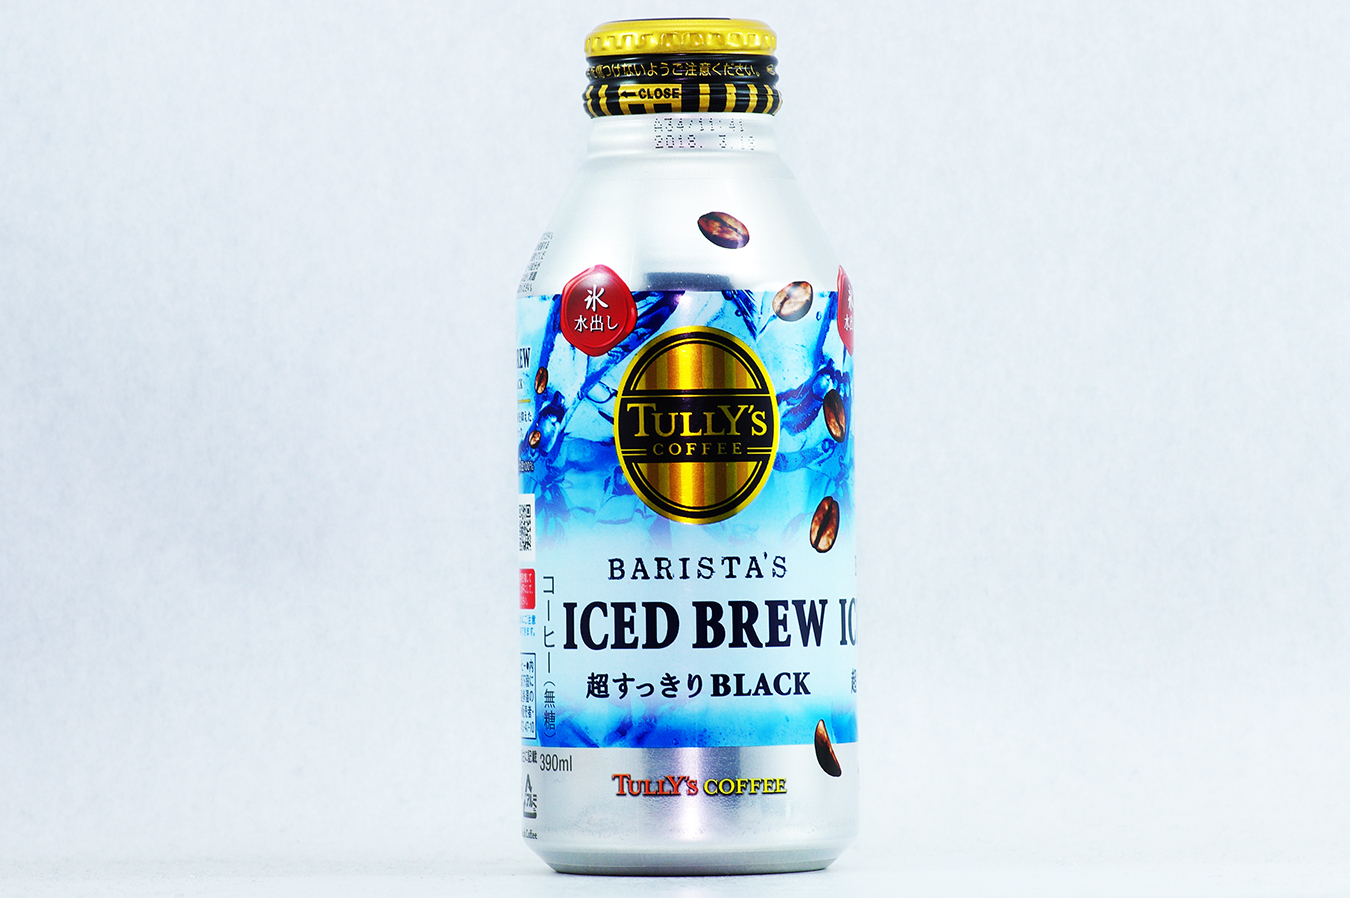 TULLY'S COFFEE BARISTA'S ICED BREW 2017年4月